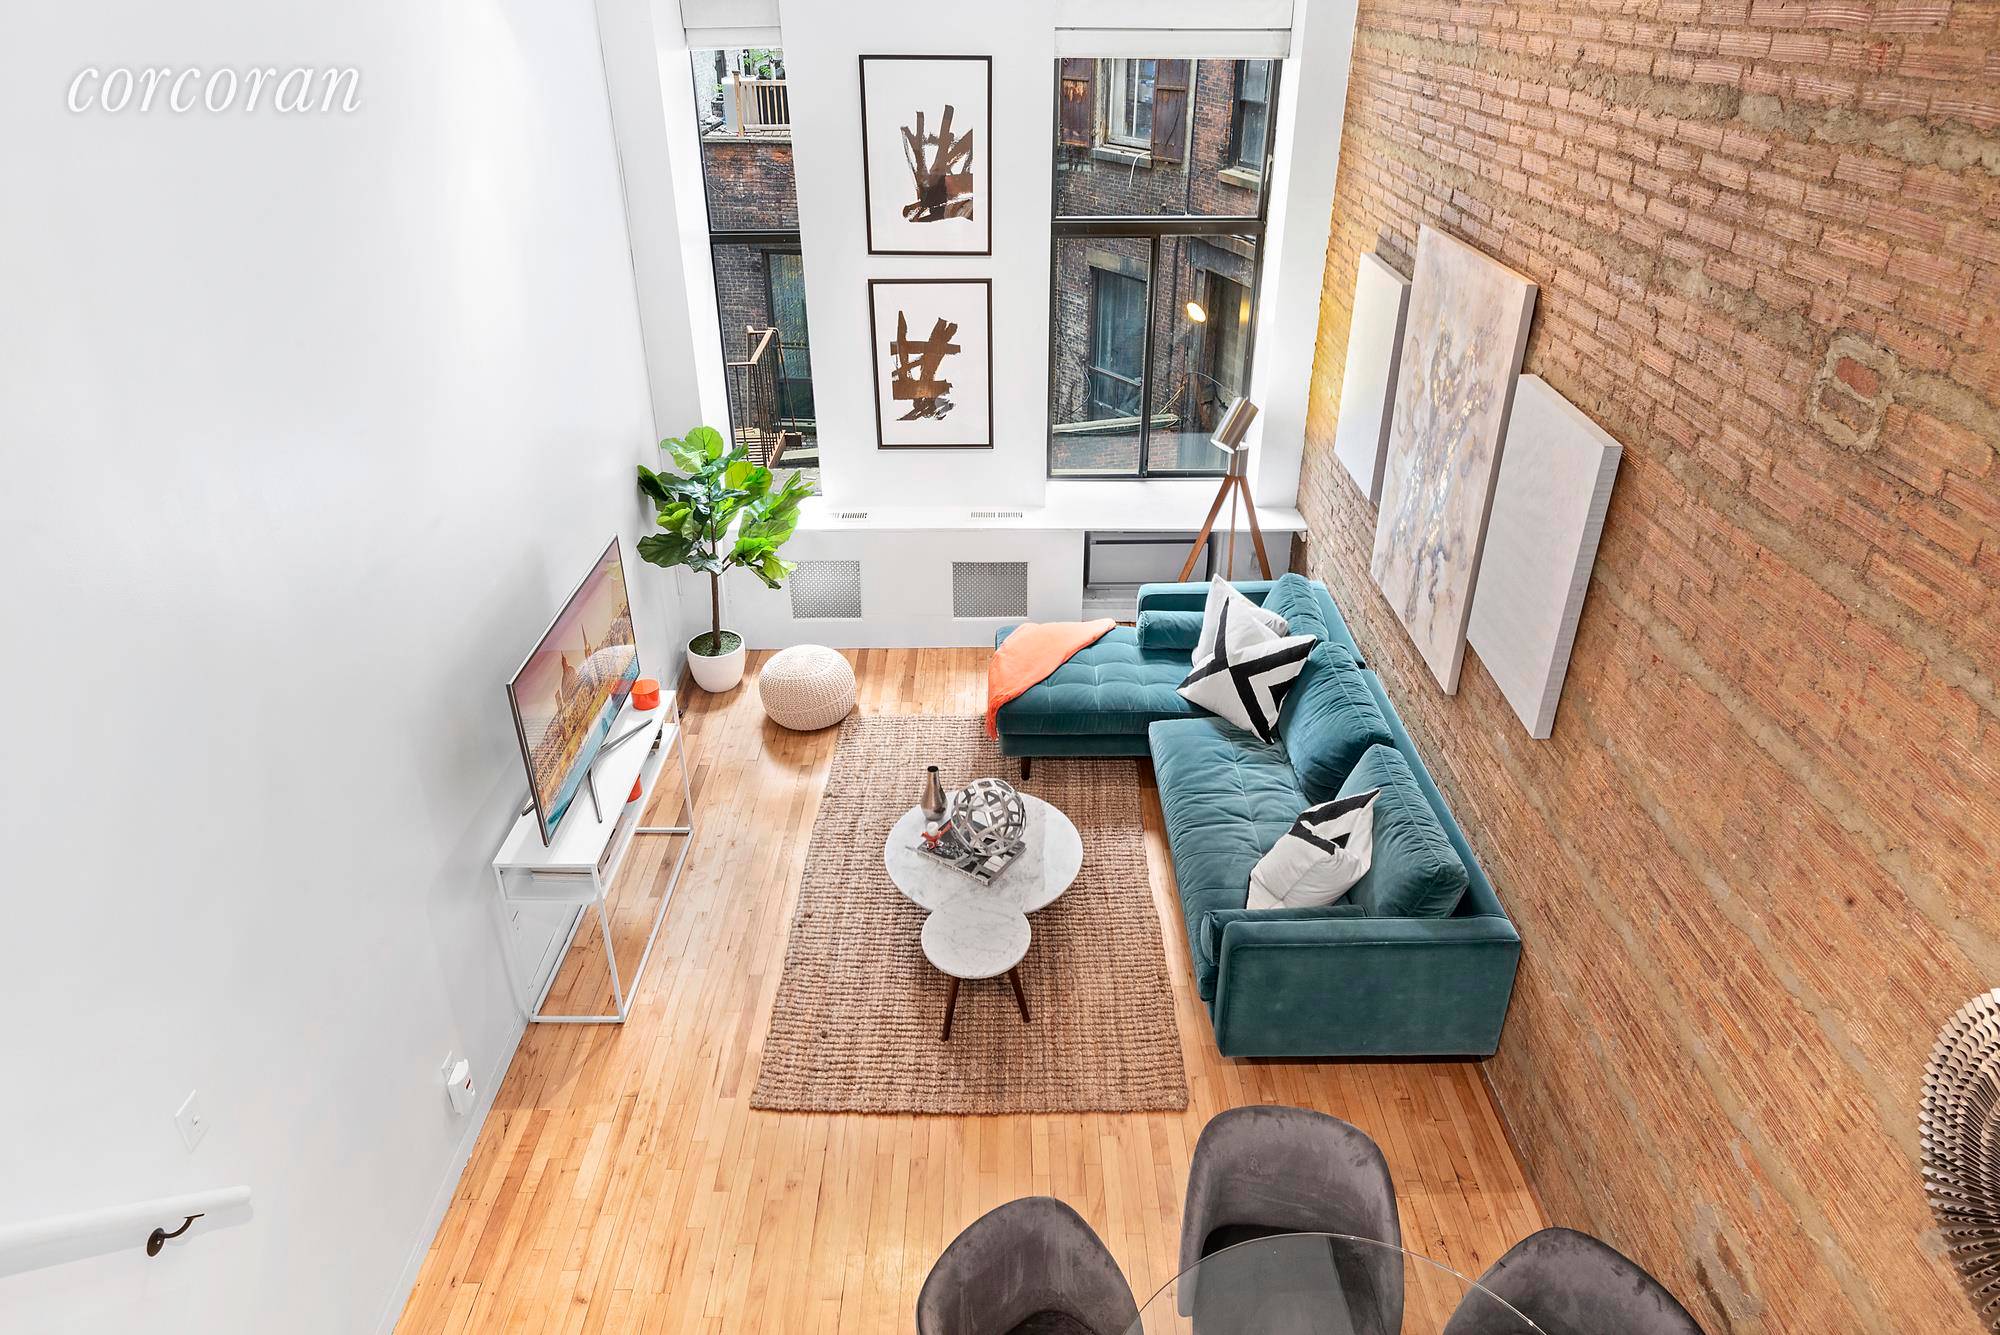 Stylish Loft offers pre war architectural details including 13.